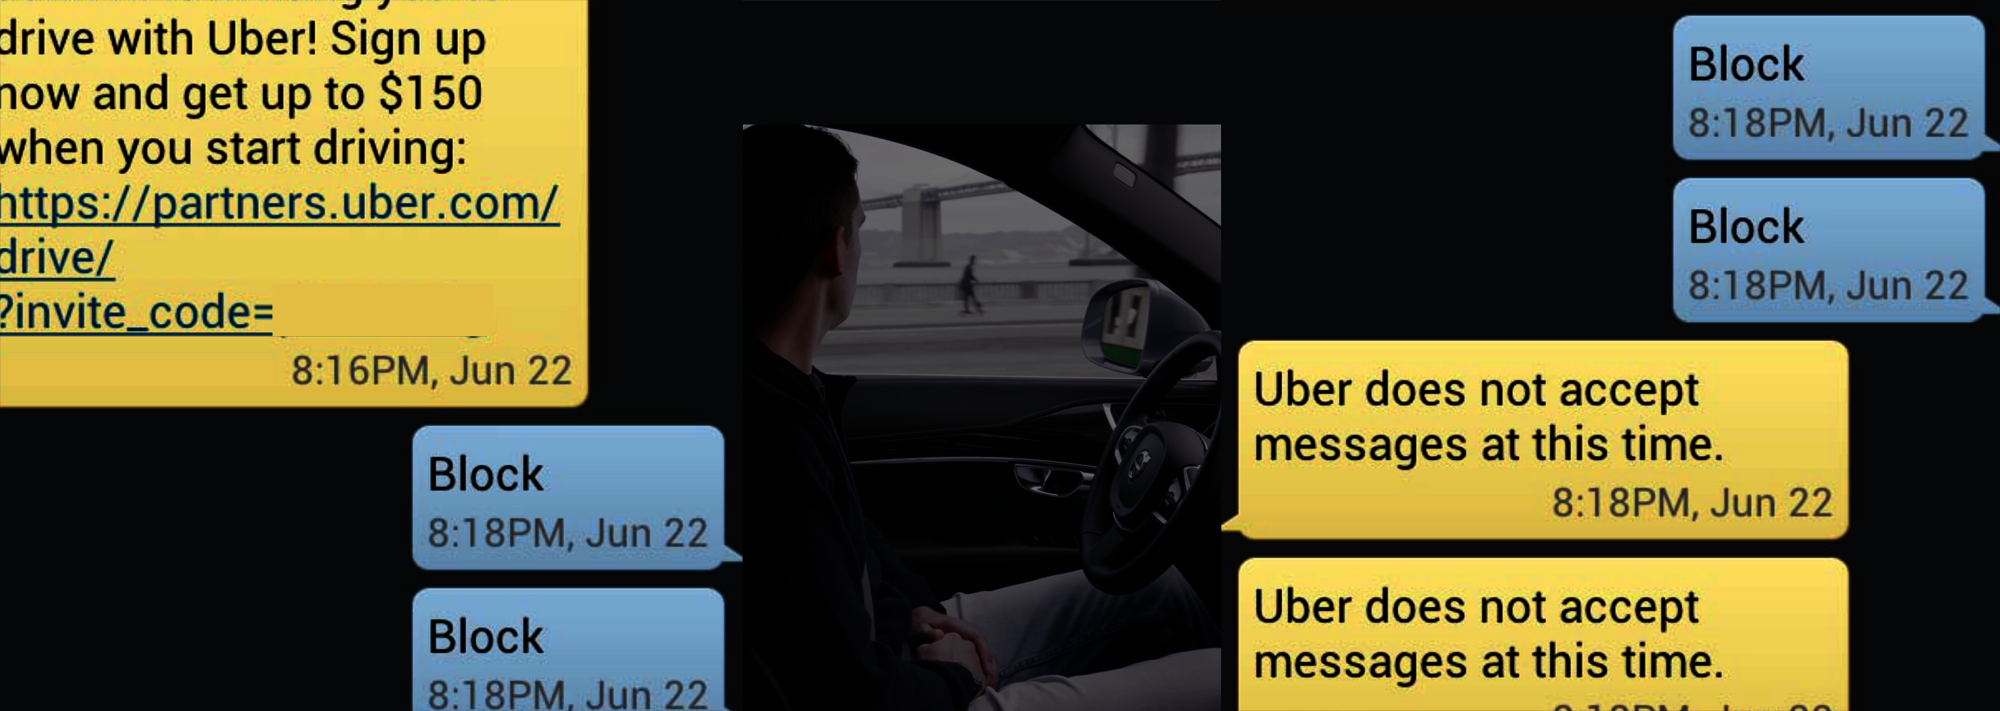 Uber Settles Charges Of Sending Unwanted Texts With No Opt-Out